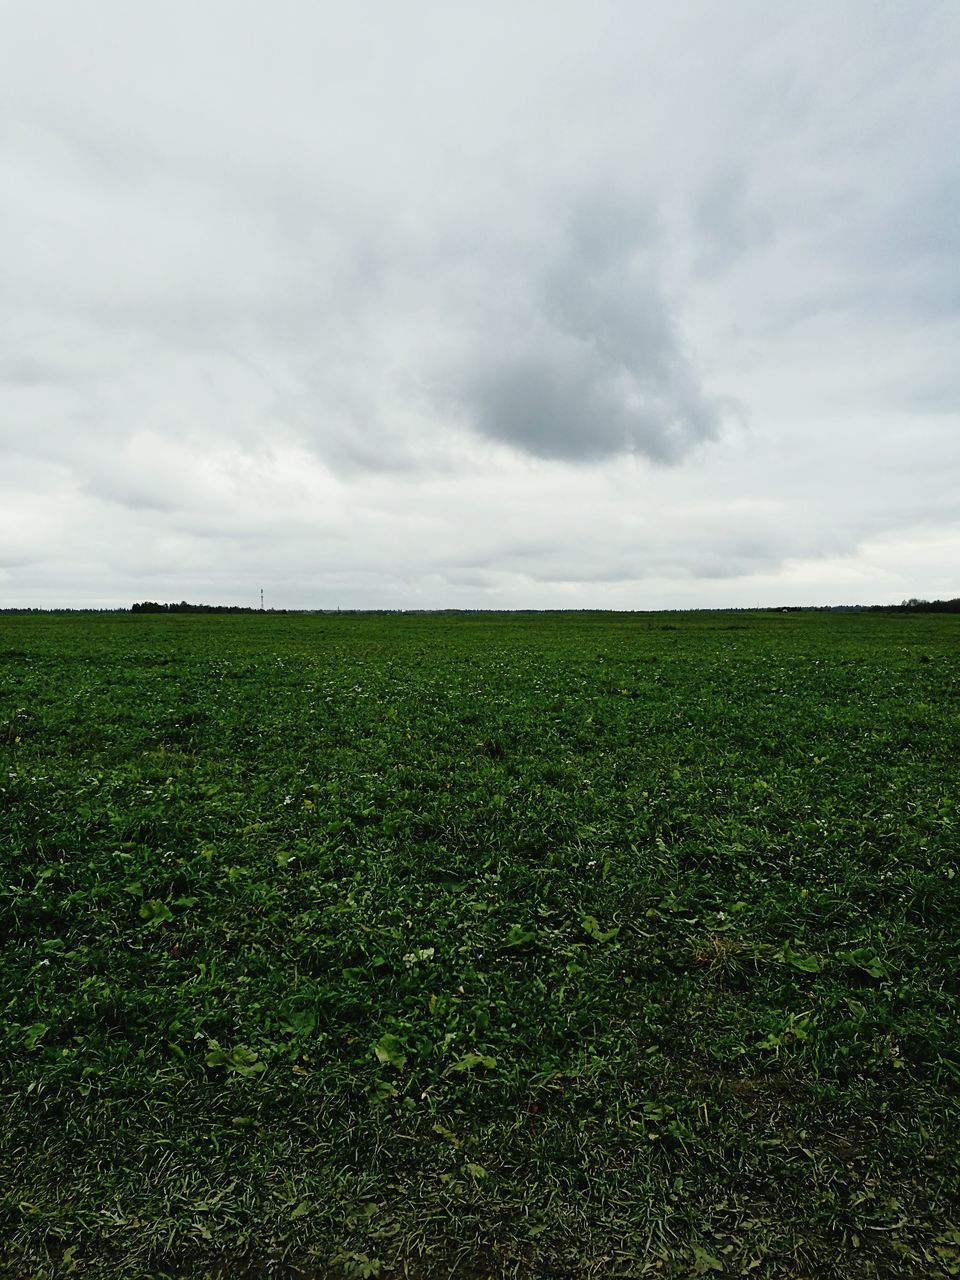 field, tranquil scene, sky, landscape, tranquility, green color, scenics, grass, beauty in nature, cloud - sky, nature, growth, cloudy, rural scene, solitude, farm, green, agriculture, day, grassy, horizon over land, no people, non-urban scene, distant, remote, majestic, cloudscape, freshness